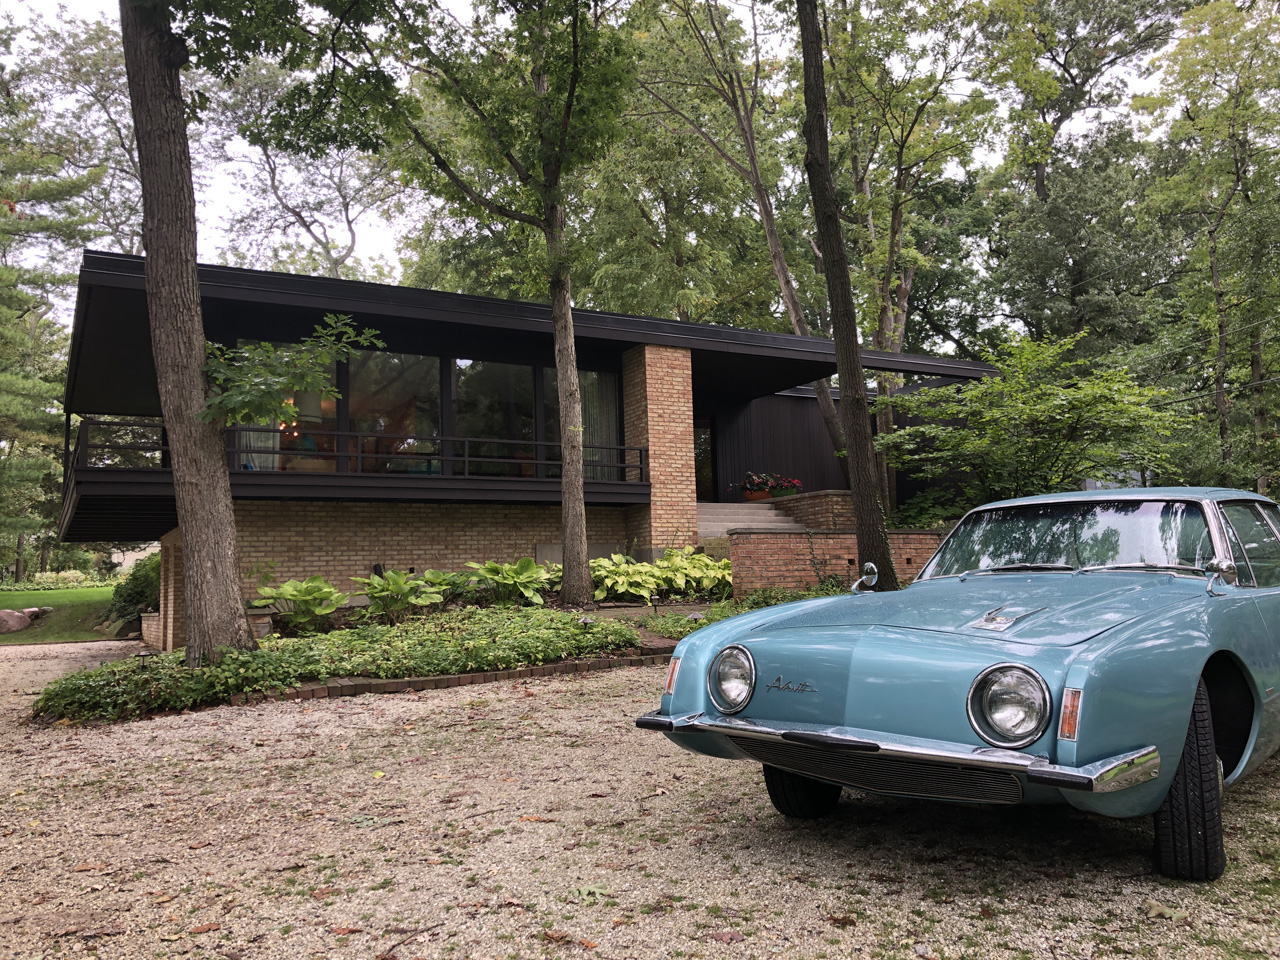 The owners' 1963 Studebaker Avanti, parked in front of their gorgeous - and very original - 1965 MCM home in Lake Forest